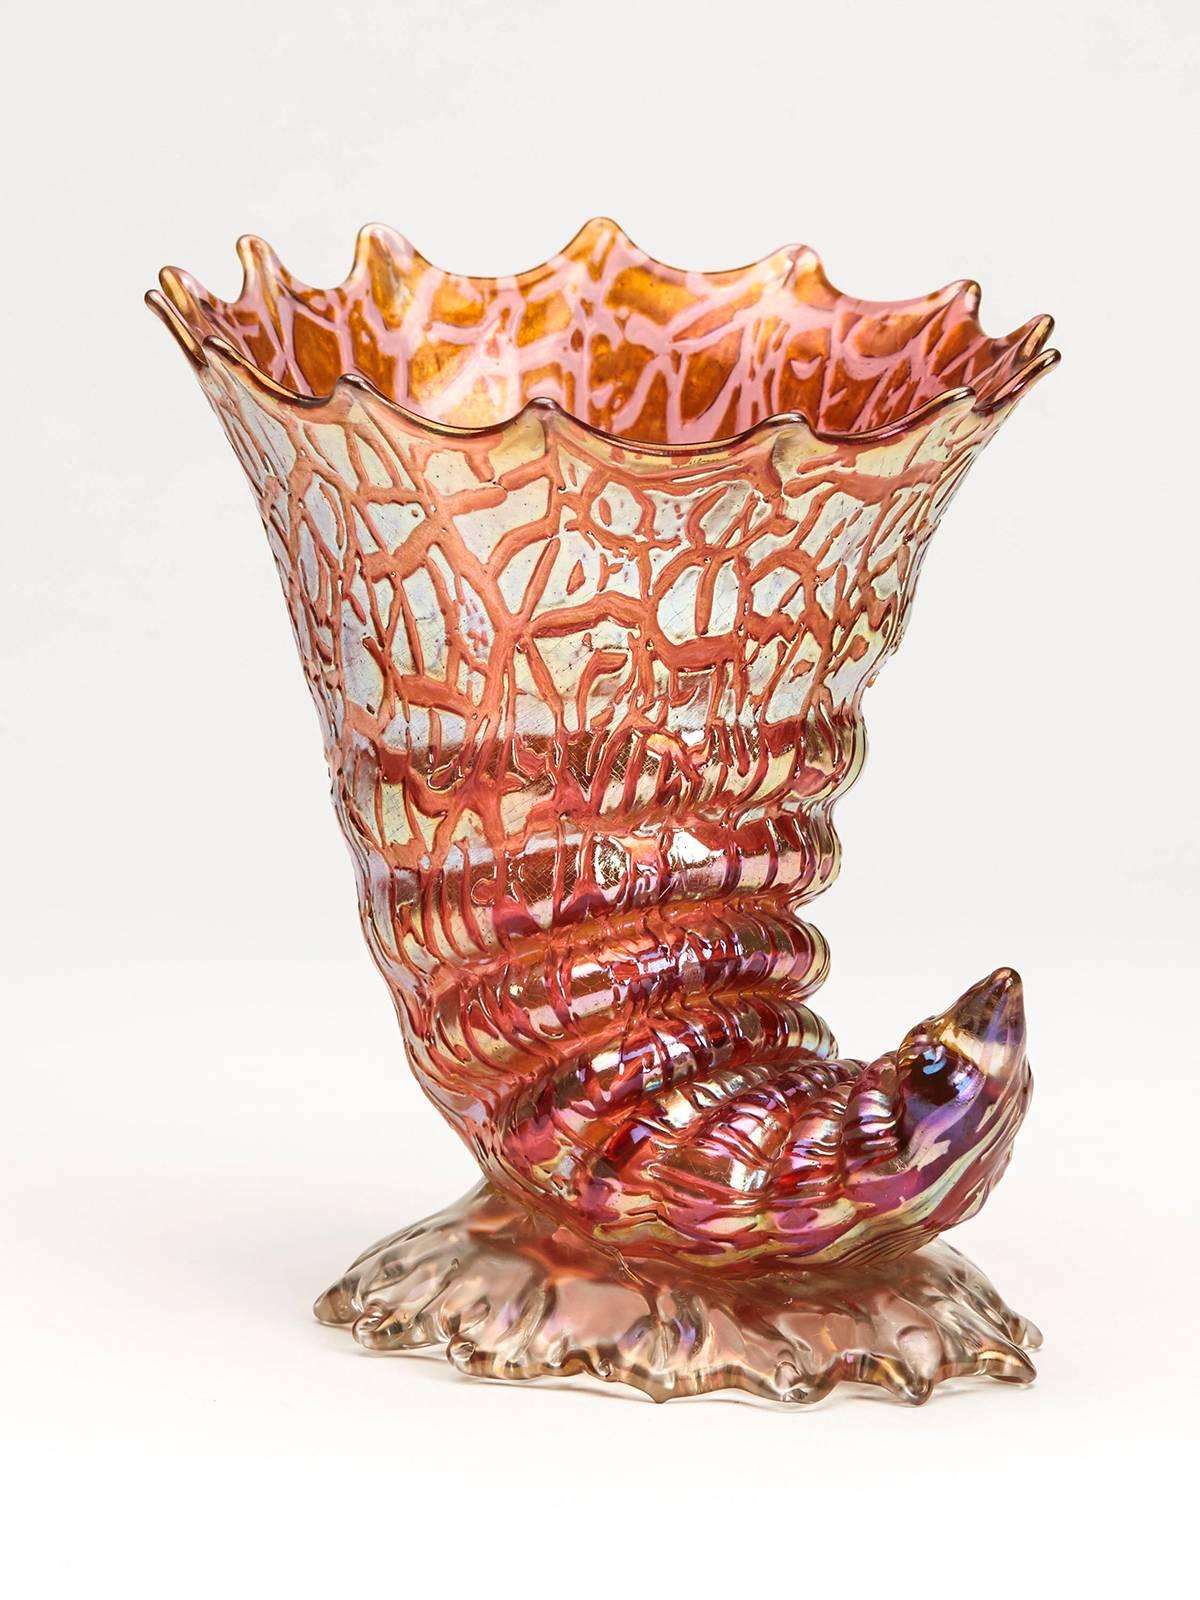 A stunning and rare Art Nouveau shell shaped cornucopia art glass vase decorated, we believe in the Chine design with a golden iridescent finish over a cranberry colored glass body on an iridescent foot. The shell shape is one of the most sought